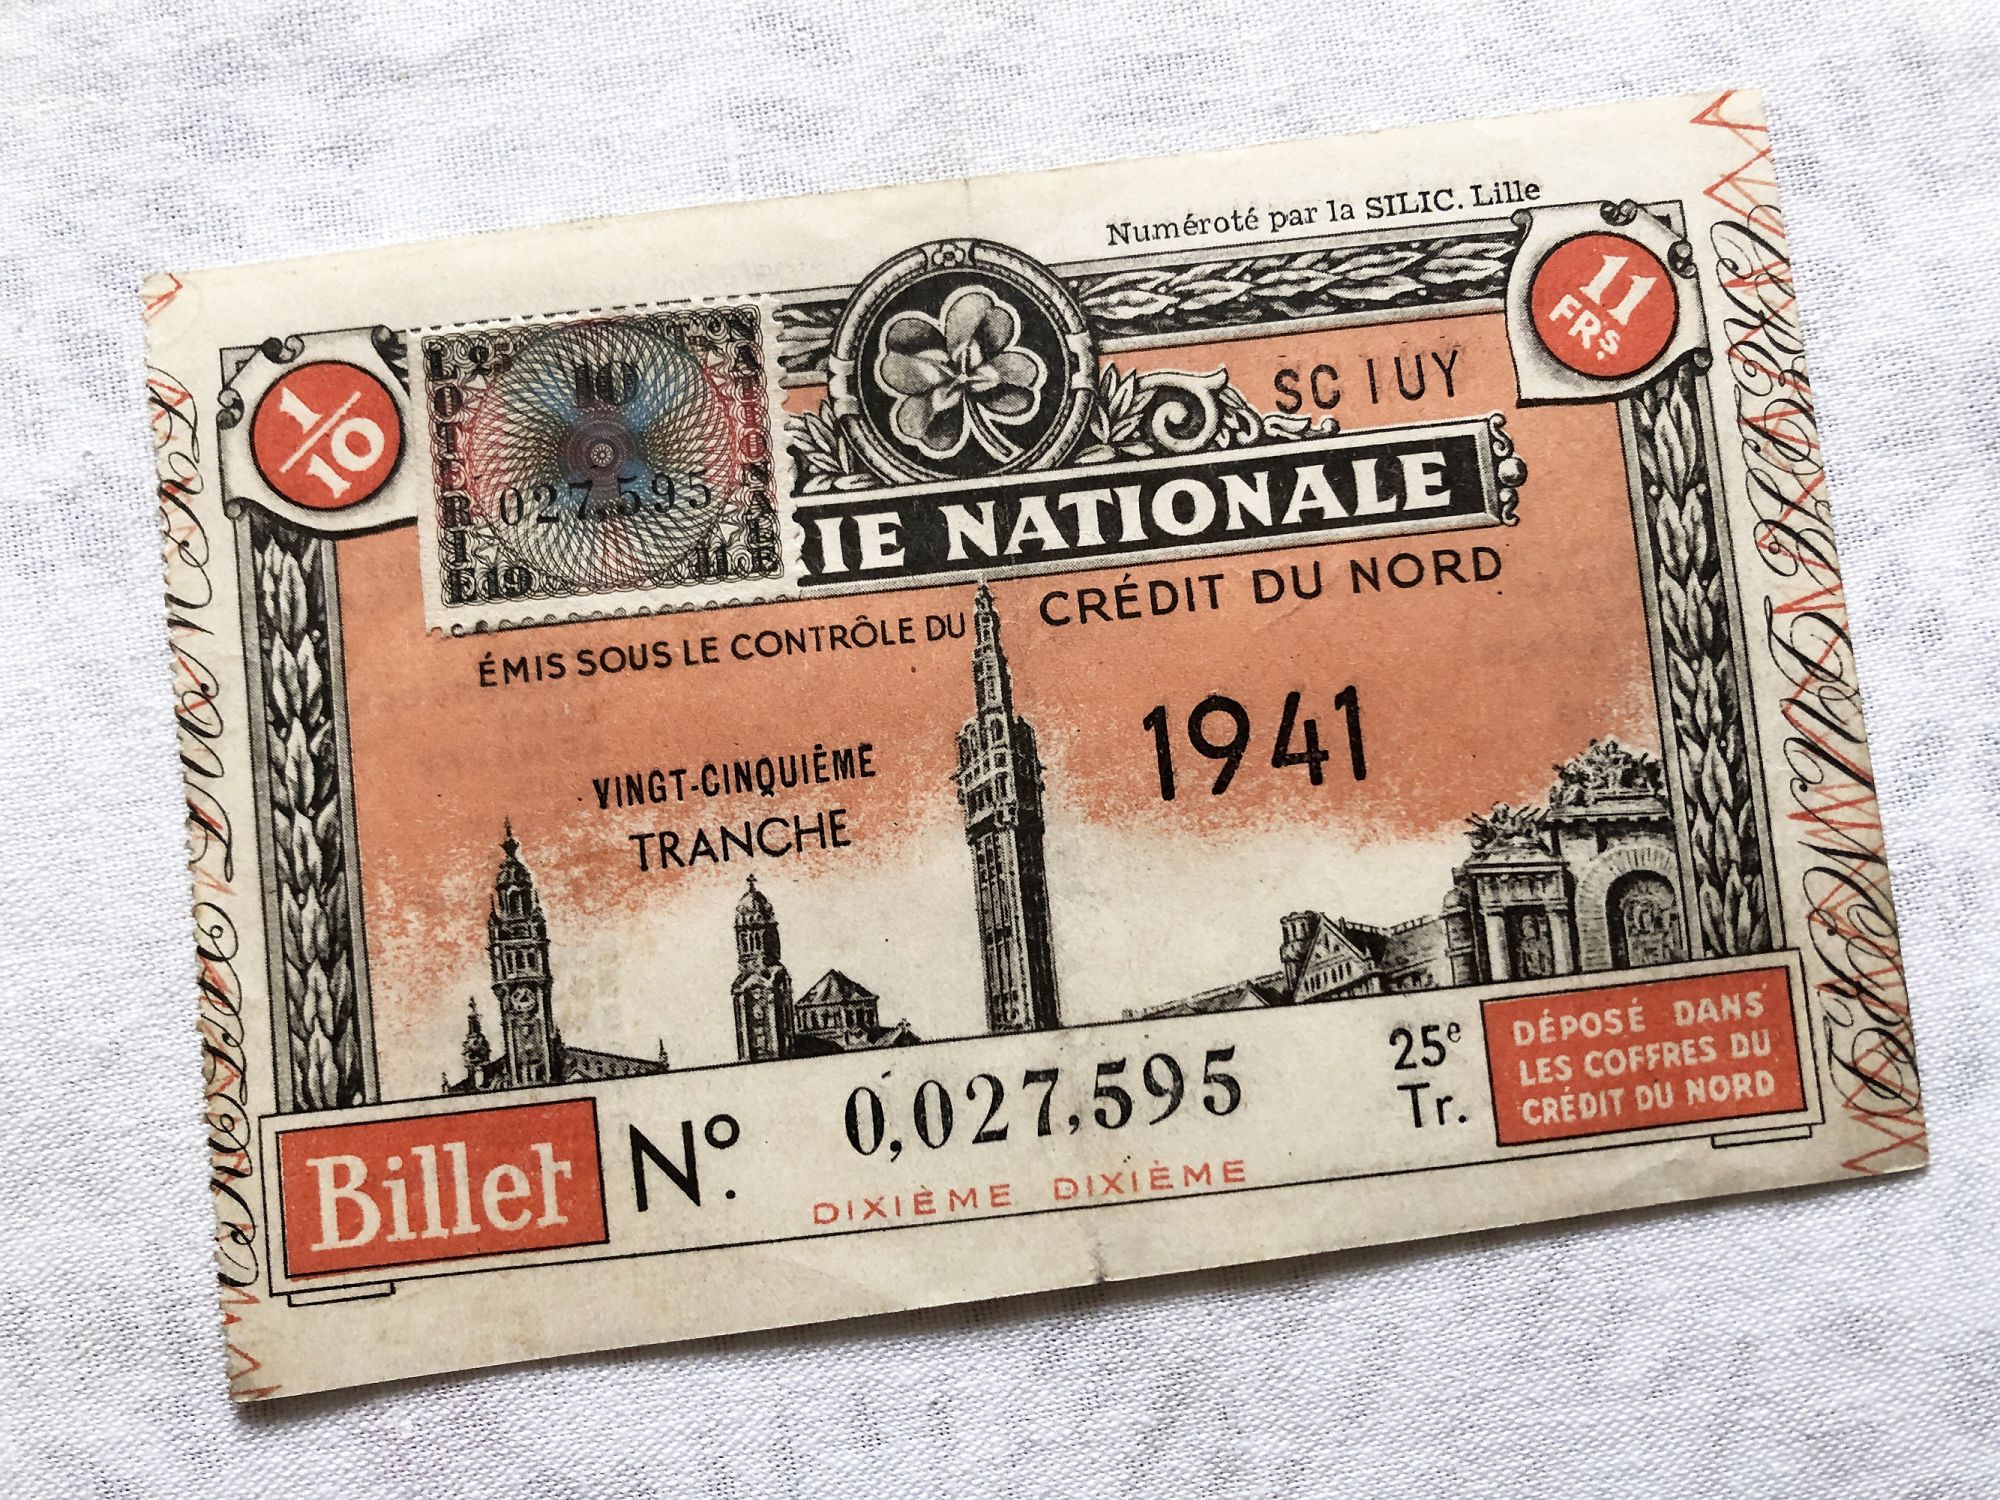 Huge French lottery tickets "Loterie Nationale" from 1941